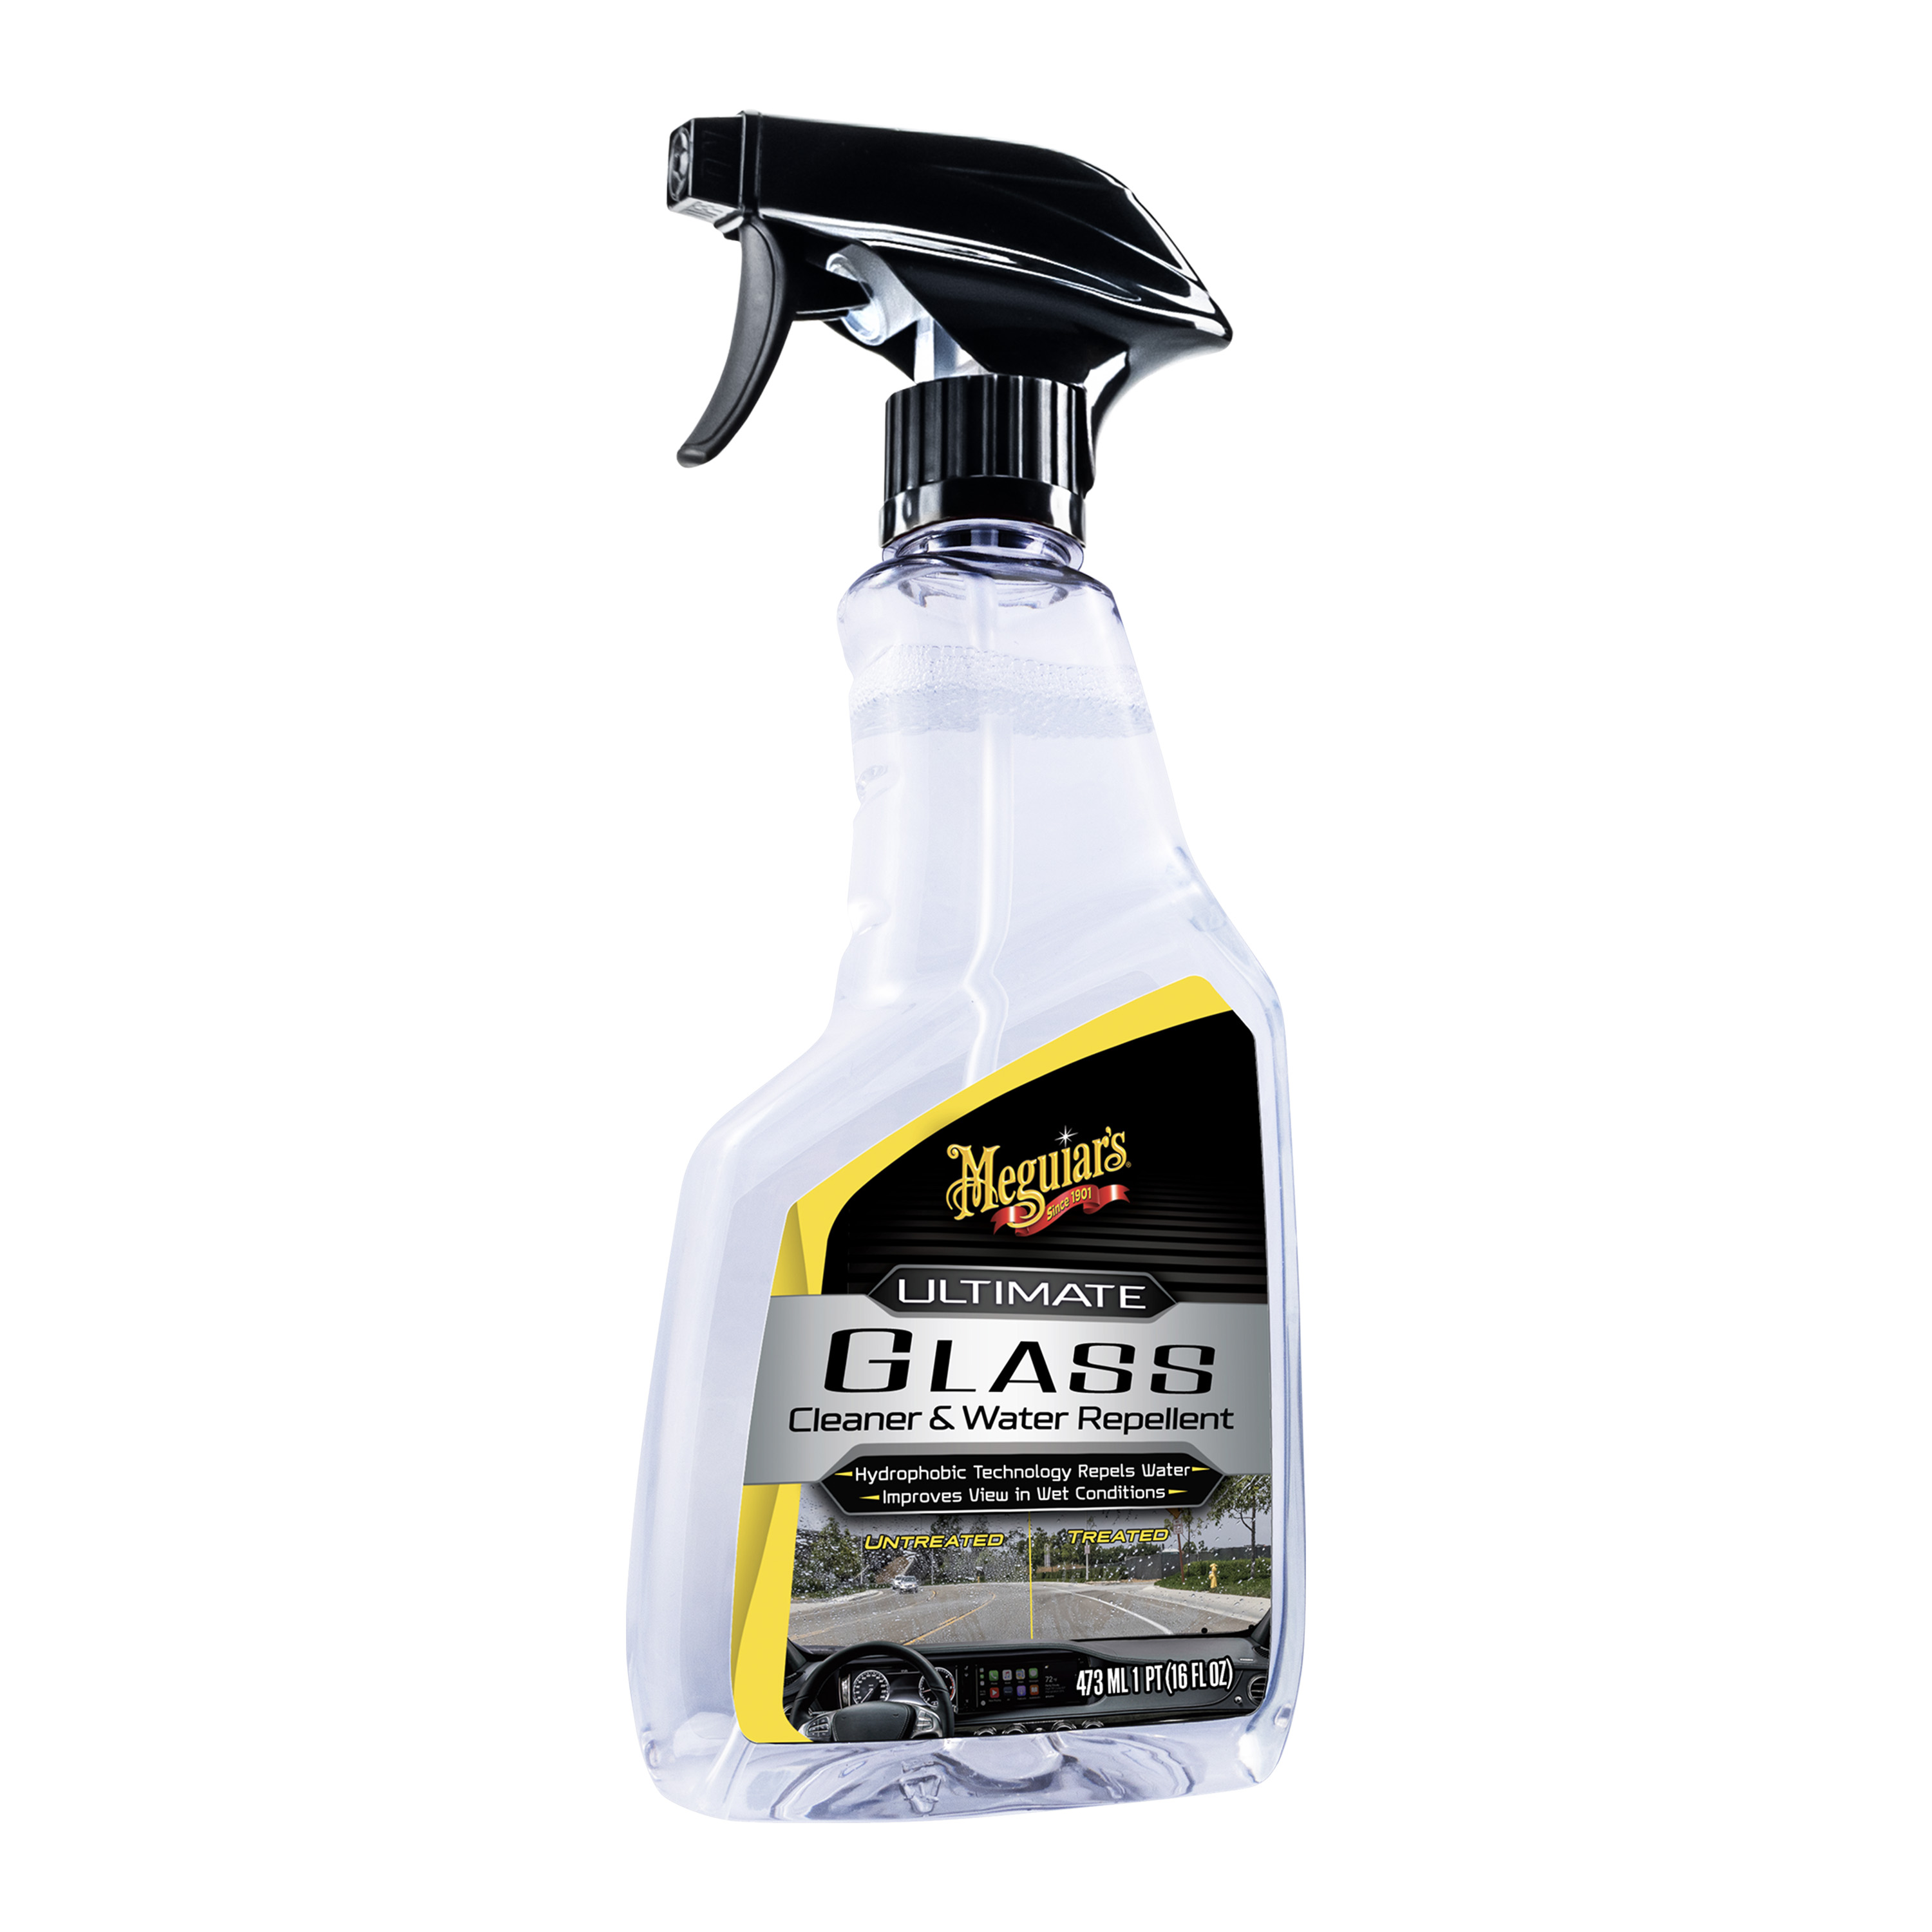 Meguiar's Ultimate Glass Cleaner & Water Repellent - Premium Glass and Window  Cleaner for Quick Cleaning with Hydrophobic Technology that Acts as a Rain  Repellent Improving Visibility in Rain, 16oz